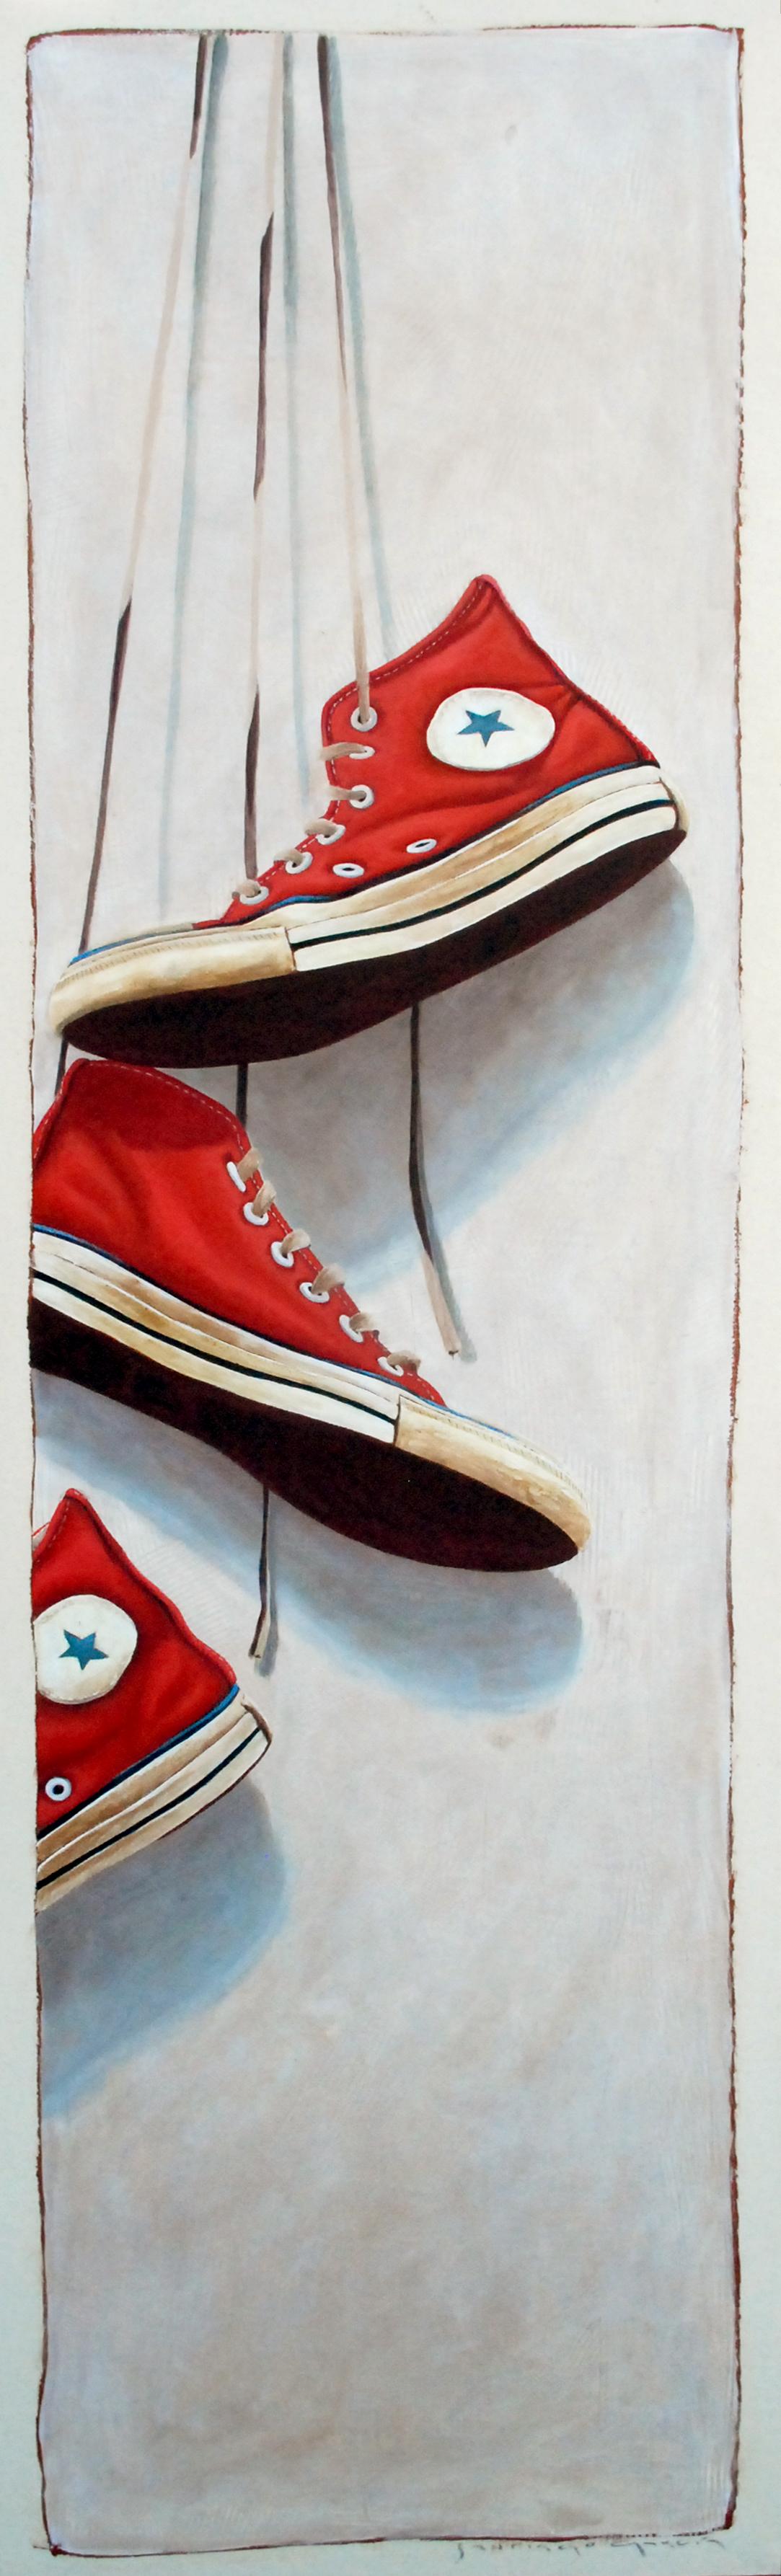 Santiago Garcia Still-Life Painting - "#1102" Oil painting of red converse high top sneakers hanging by the laces